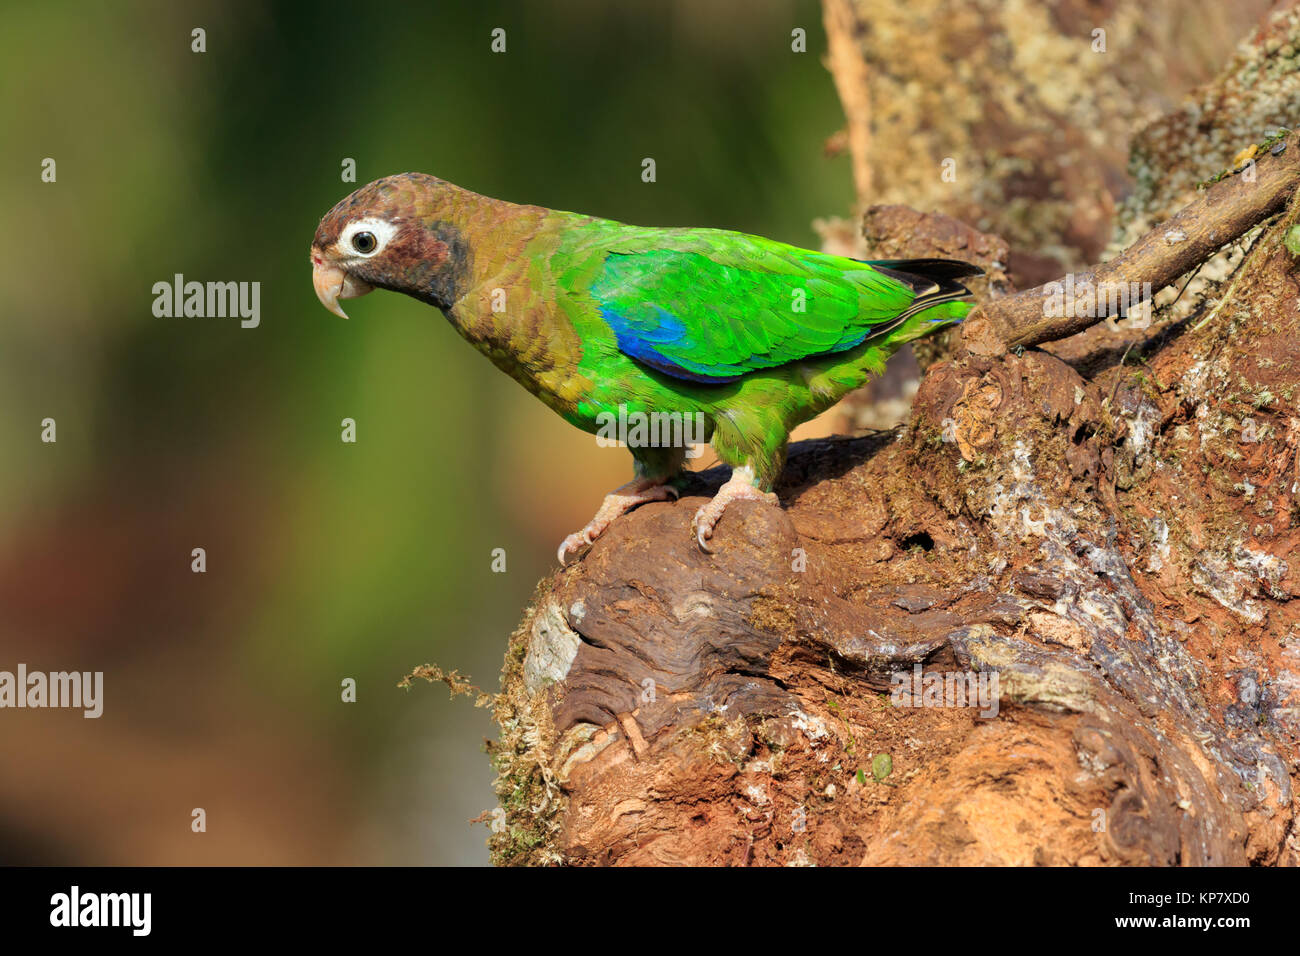 Brown Hooded Parrot From Costa Rica Rain Forest Stock Photo